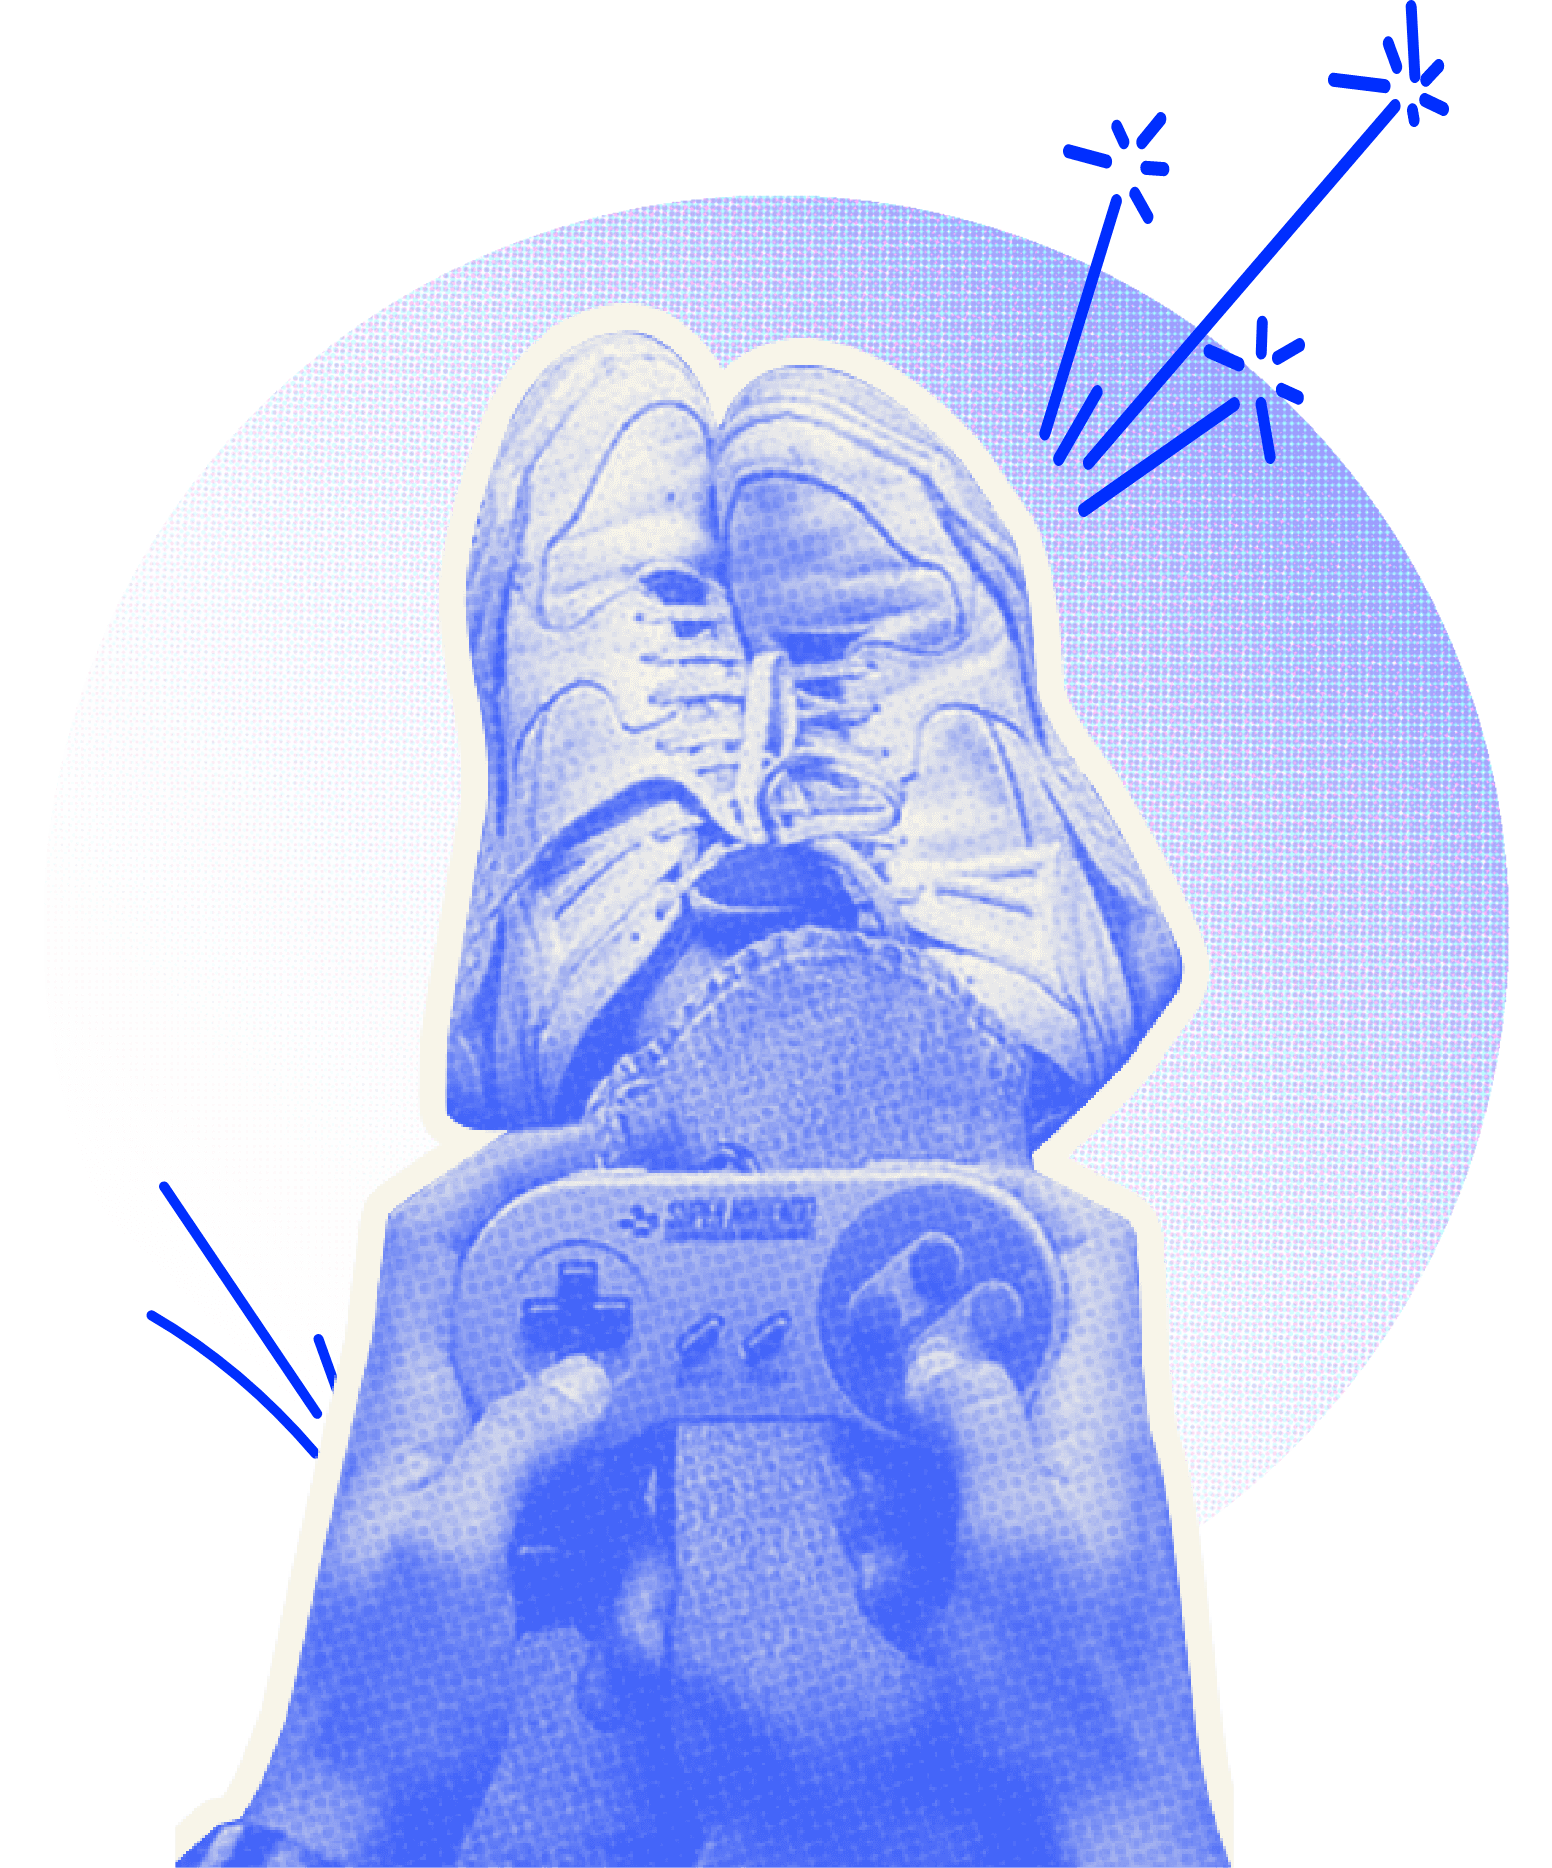 A person with their feet crossed and holding a retro controller